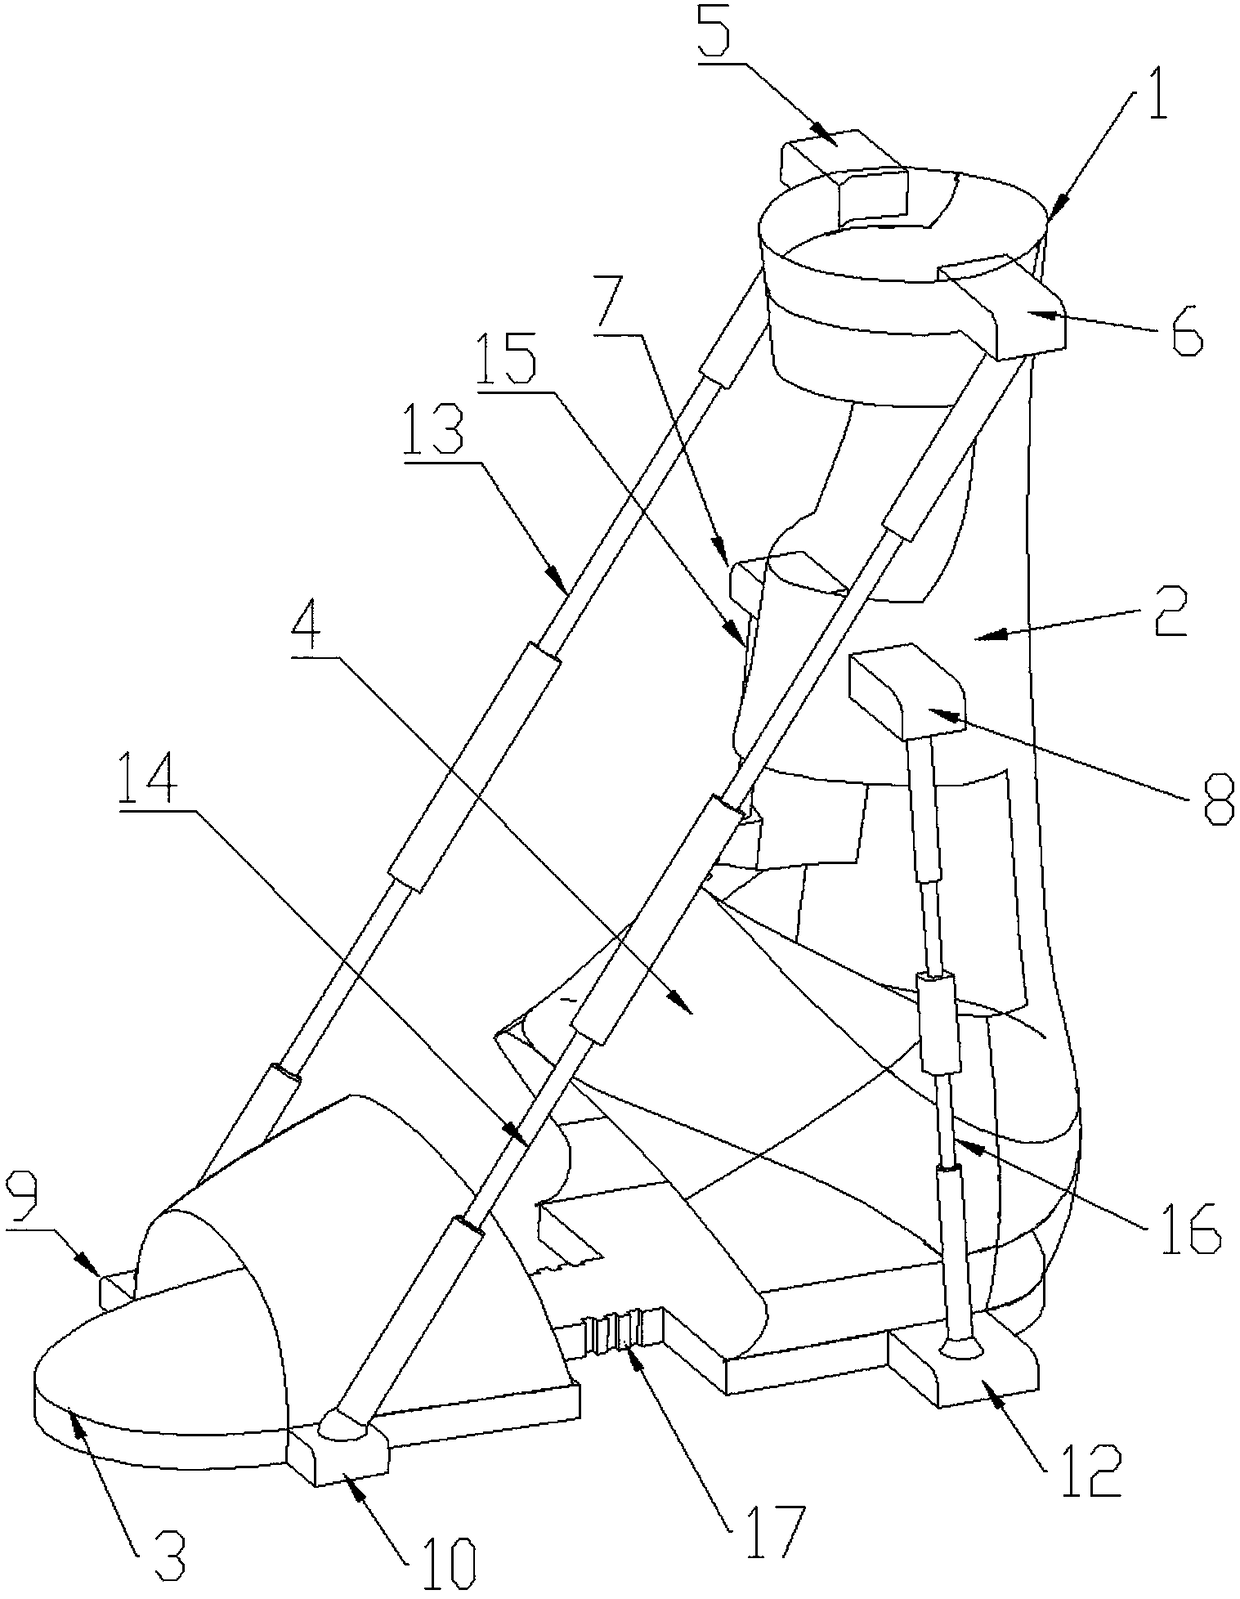 Four-degree-of-freedom ankle joint rehabilitation robot capable of assisting training